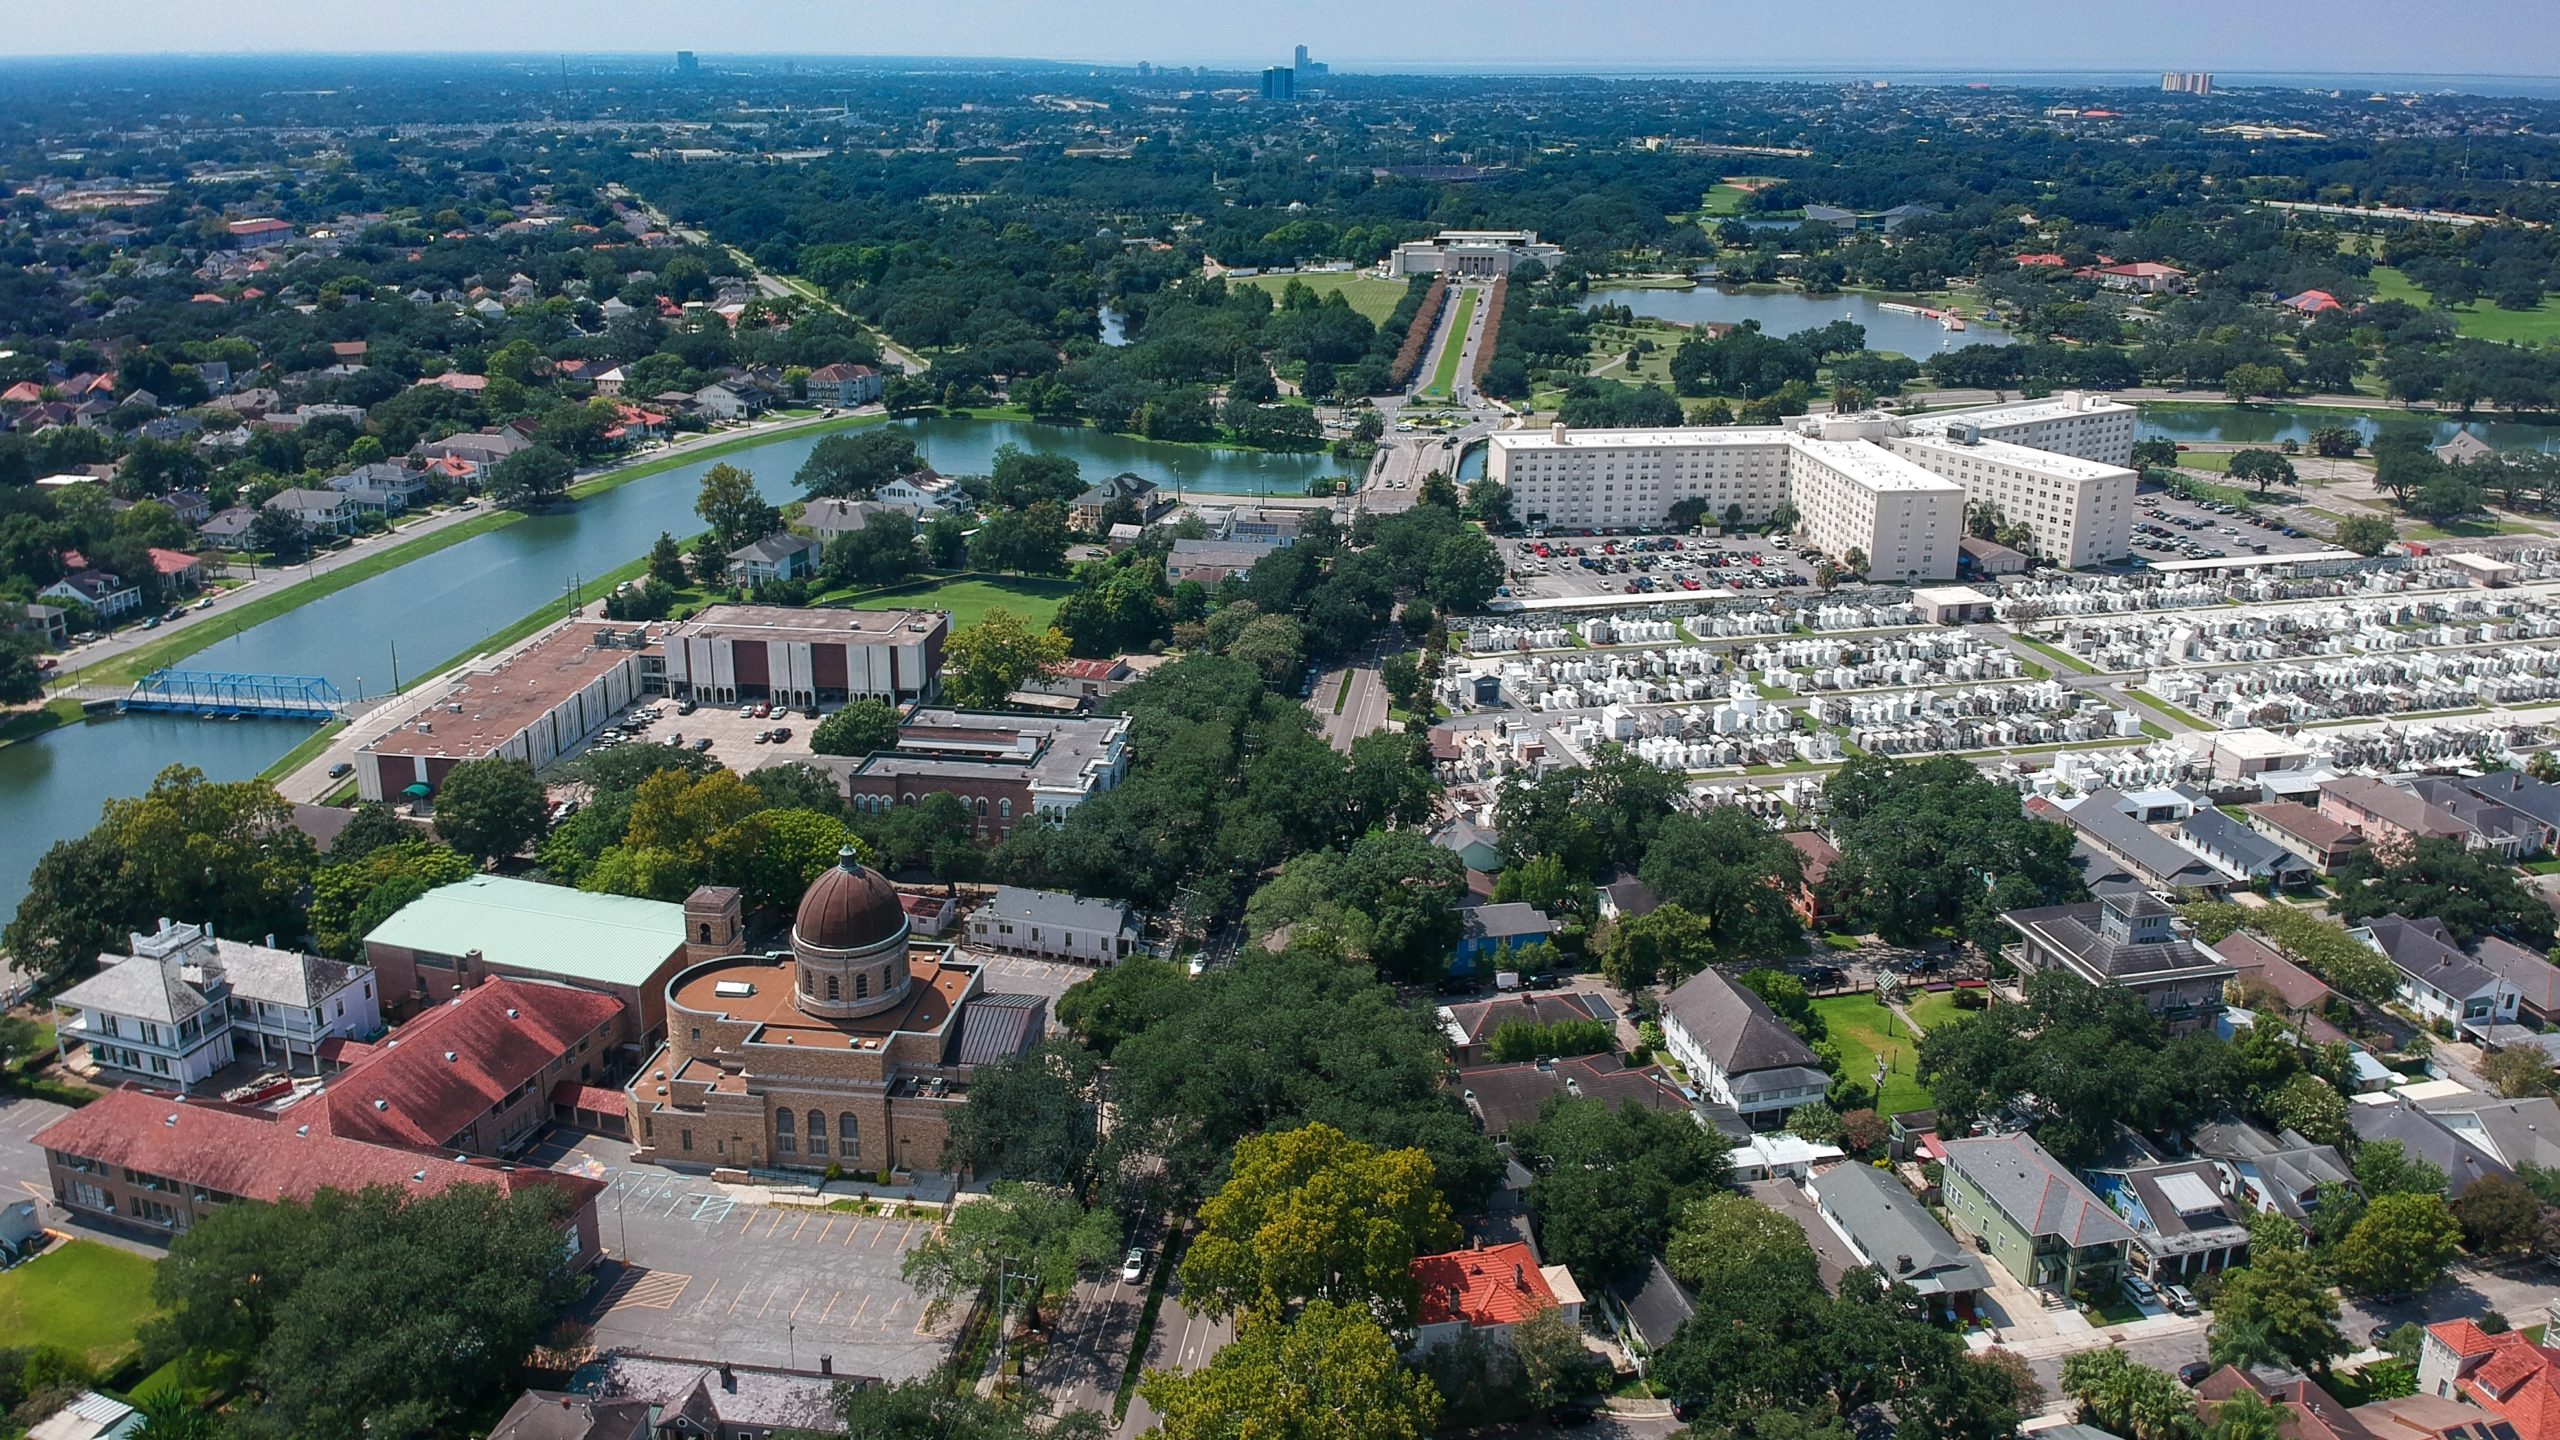 view looking down Esplanade Avenue toward City Park and the New Orleans Museum of Art (NOMA). Drone photograph by Megan Mackel for Very Local New Orleans.